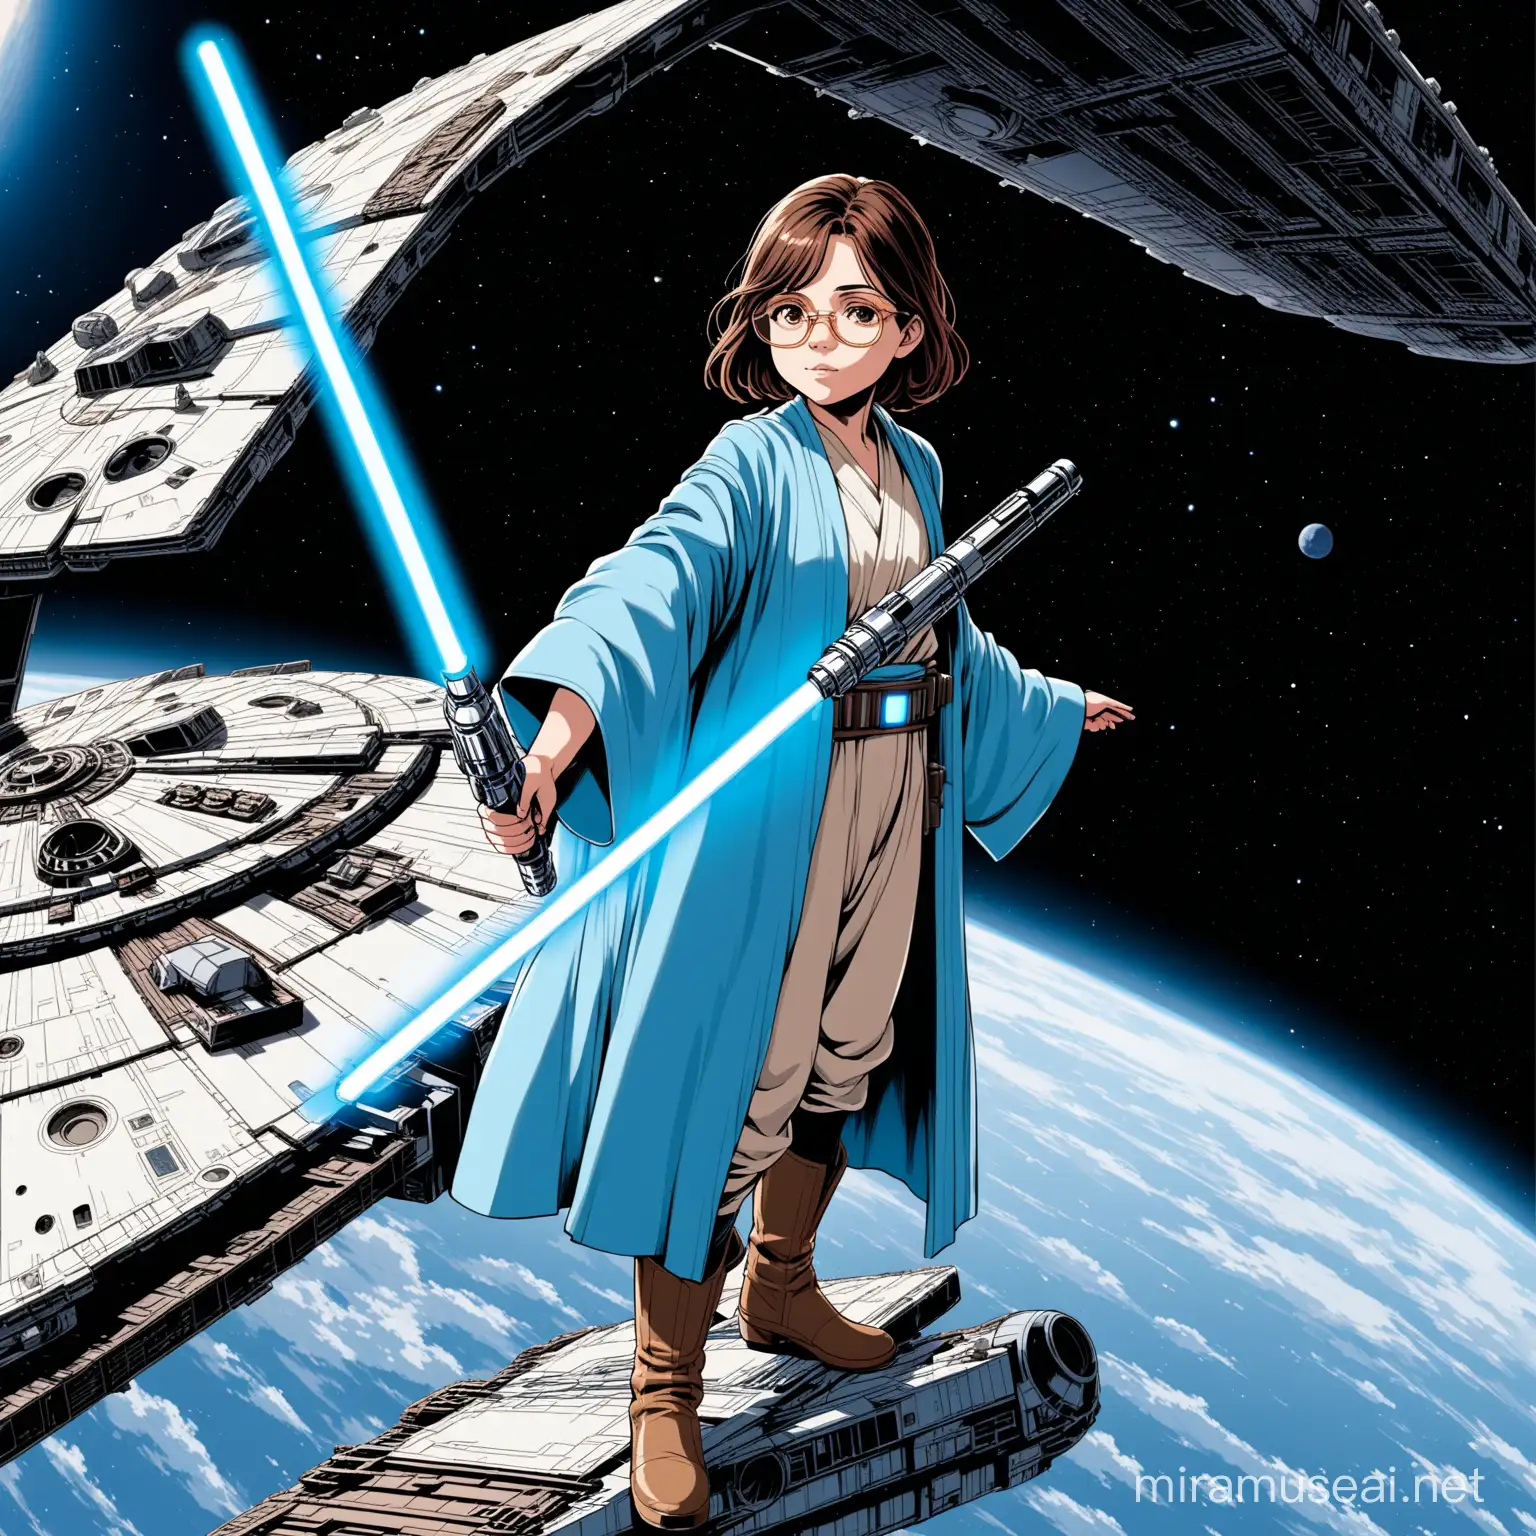 12 year old girl, short brown hair, rose gold glasses, brown eyes, holding lightsaber, wearing pale blue jedi robes, boots, standing on top of the millennium falcon, in space